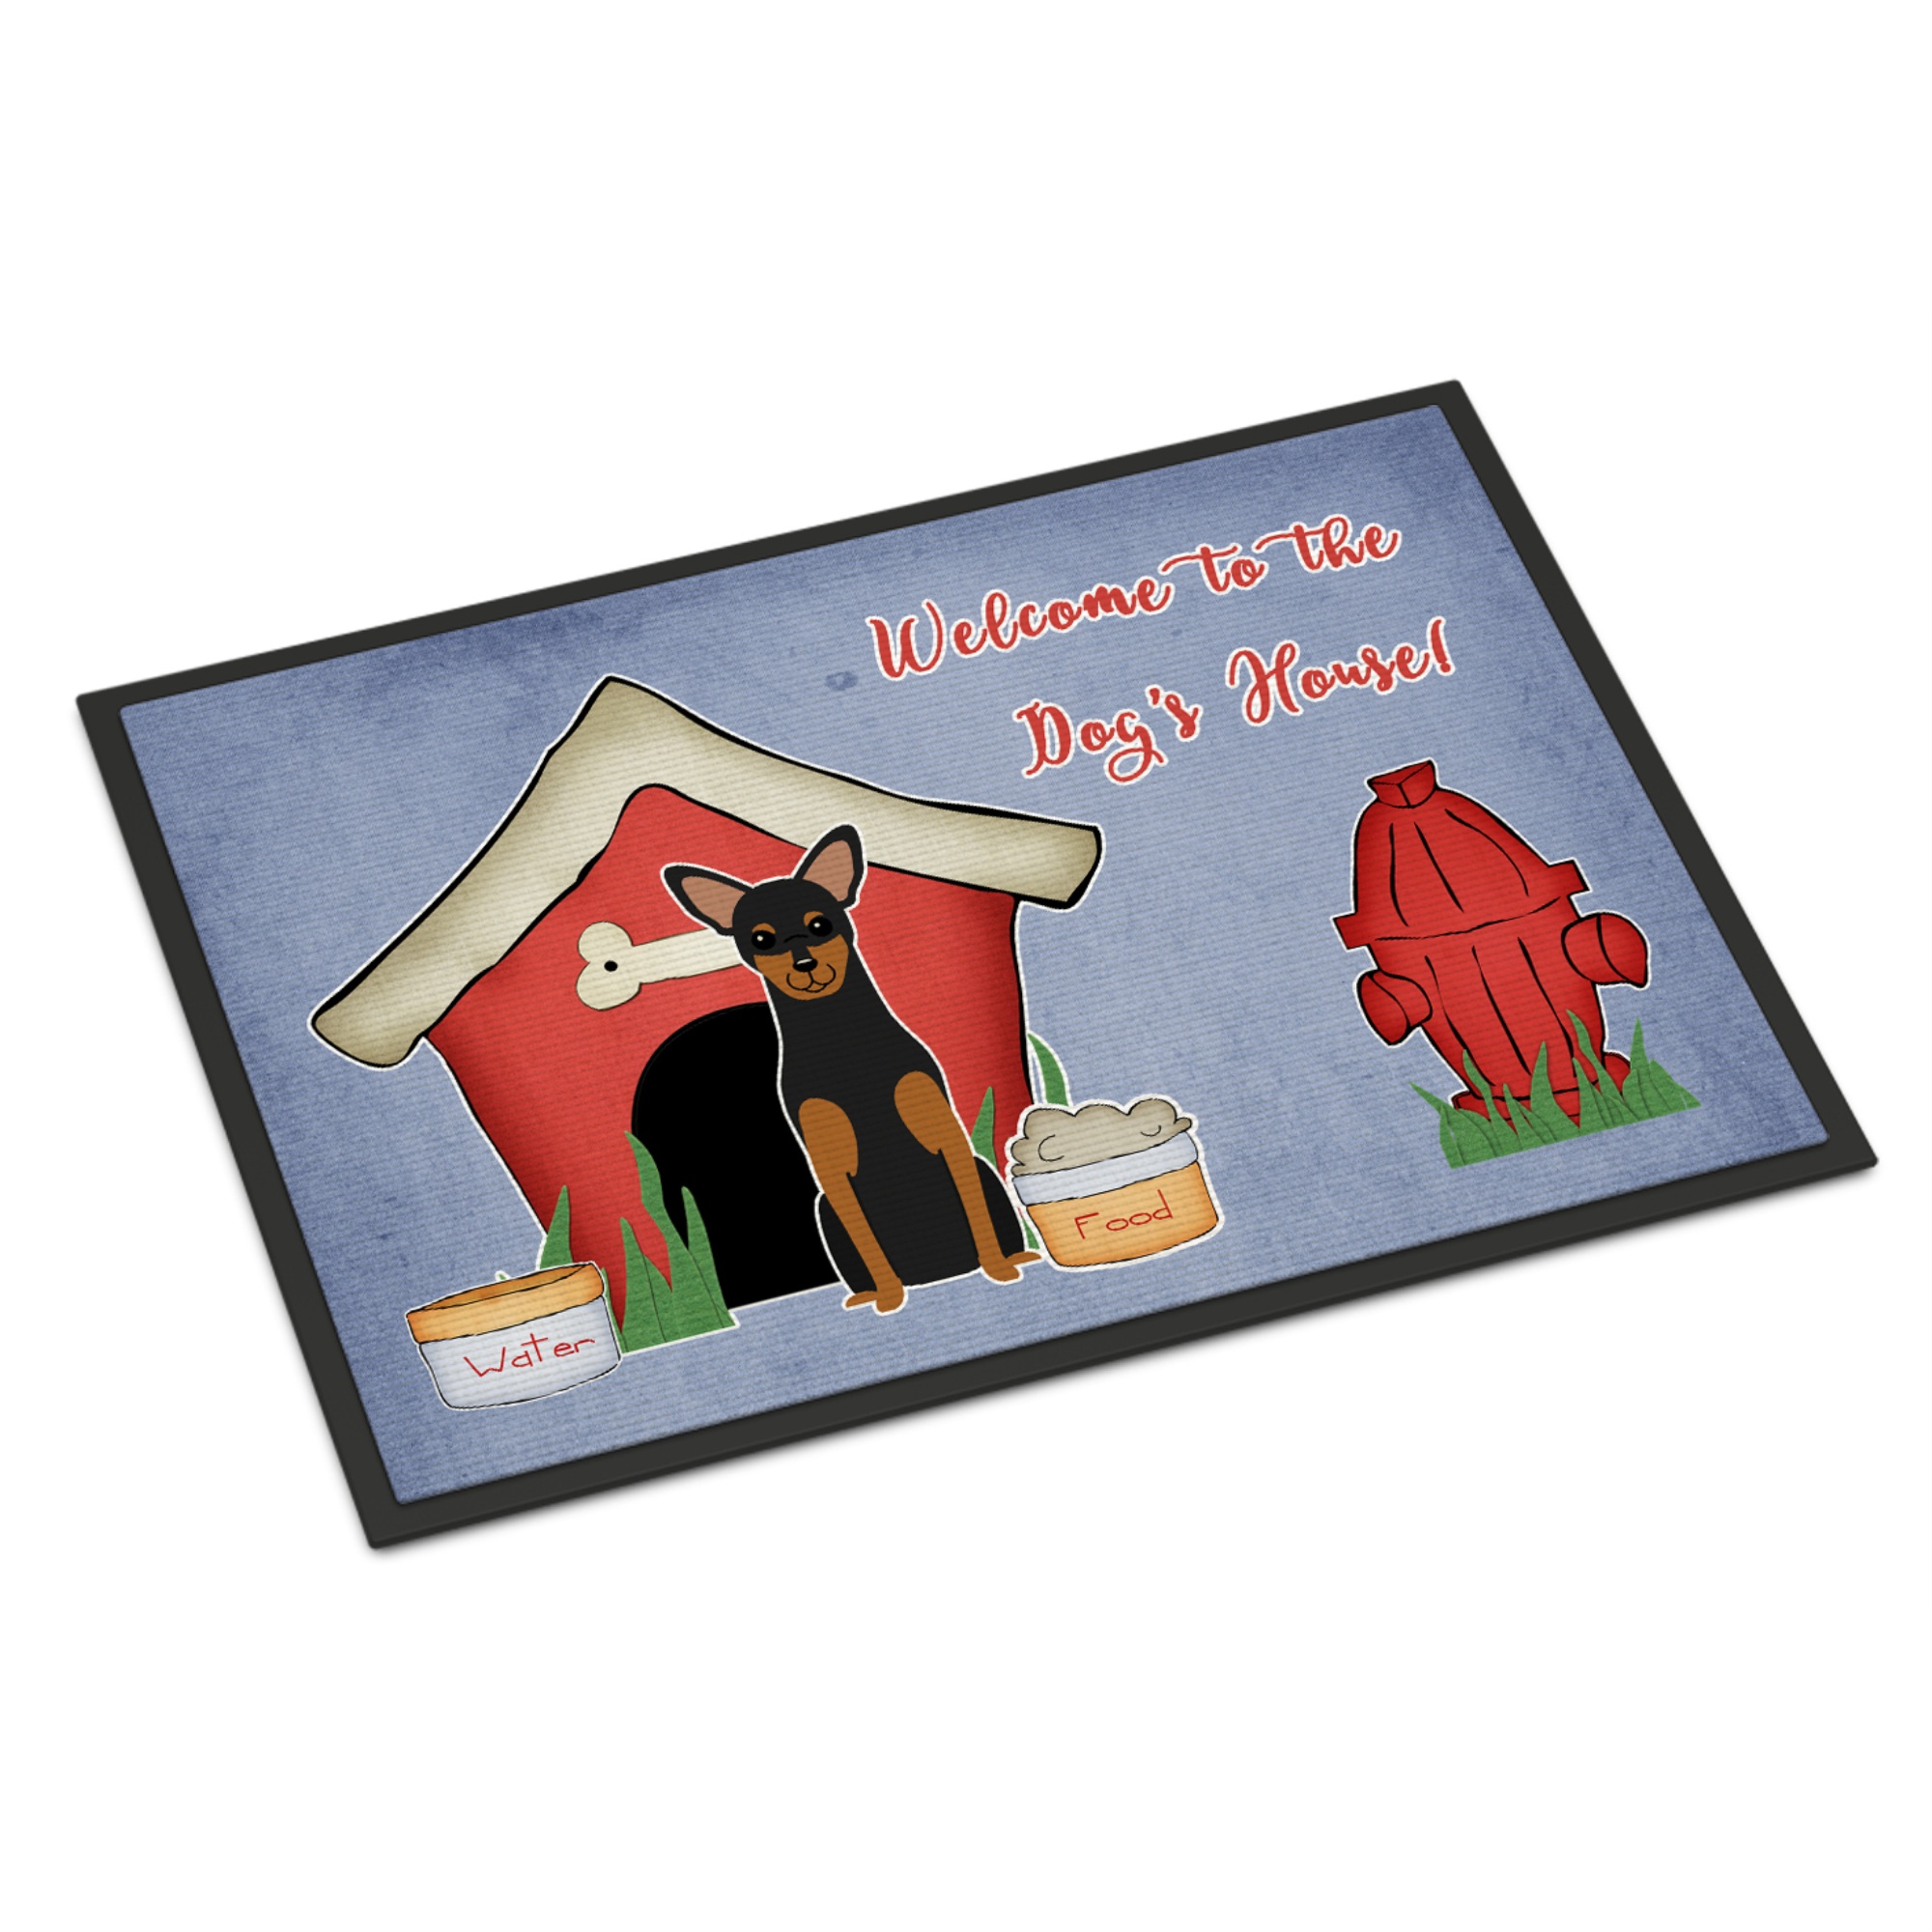 Caroline's Treasures "Caroline's Treasures Dog House Collection Manchester Terrier Indoor or Outdoor Mat 24x36 BB2782JMAT 24 x 36"" Multicolor"